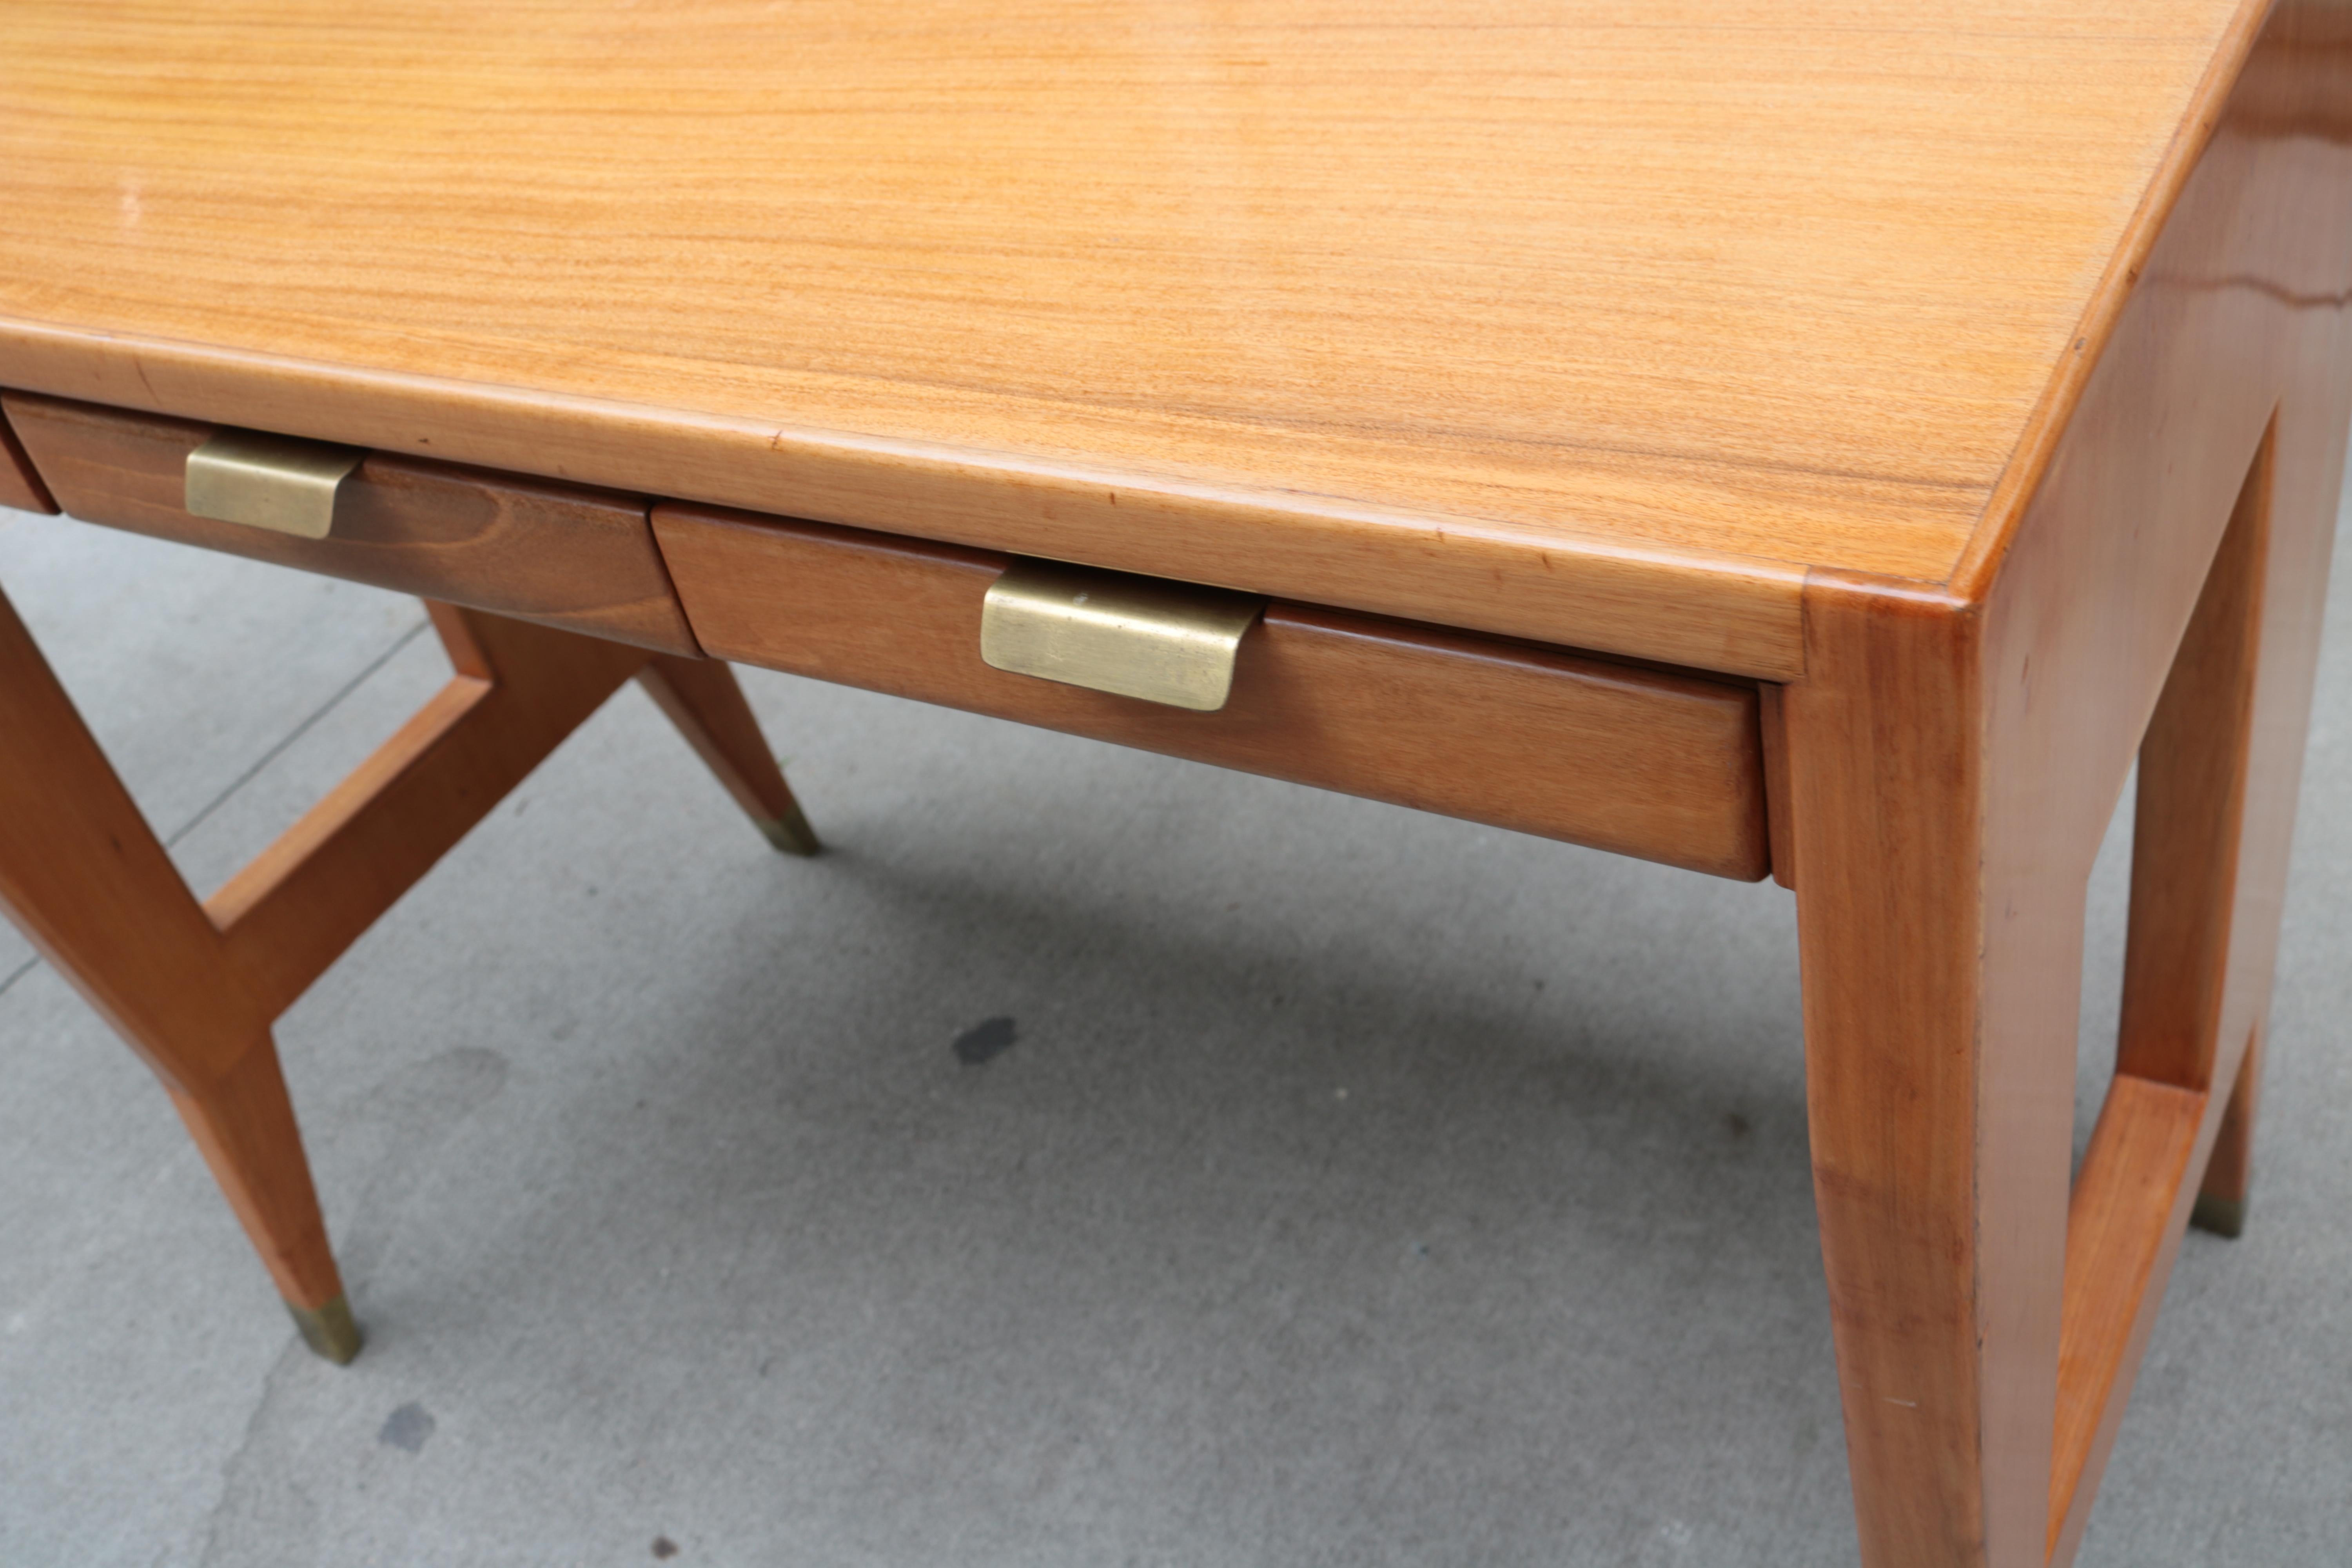 A Gio Ponti designed small writing table or console.
Mahogany with brass pulls.
Tables from the Banca Nazionale del Lavoro
in Bergamo, Italy.
Comes with letter of authenticity
from the Gio Ponti archives.
 